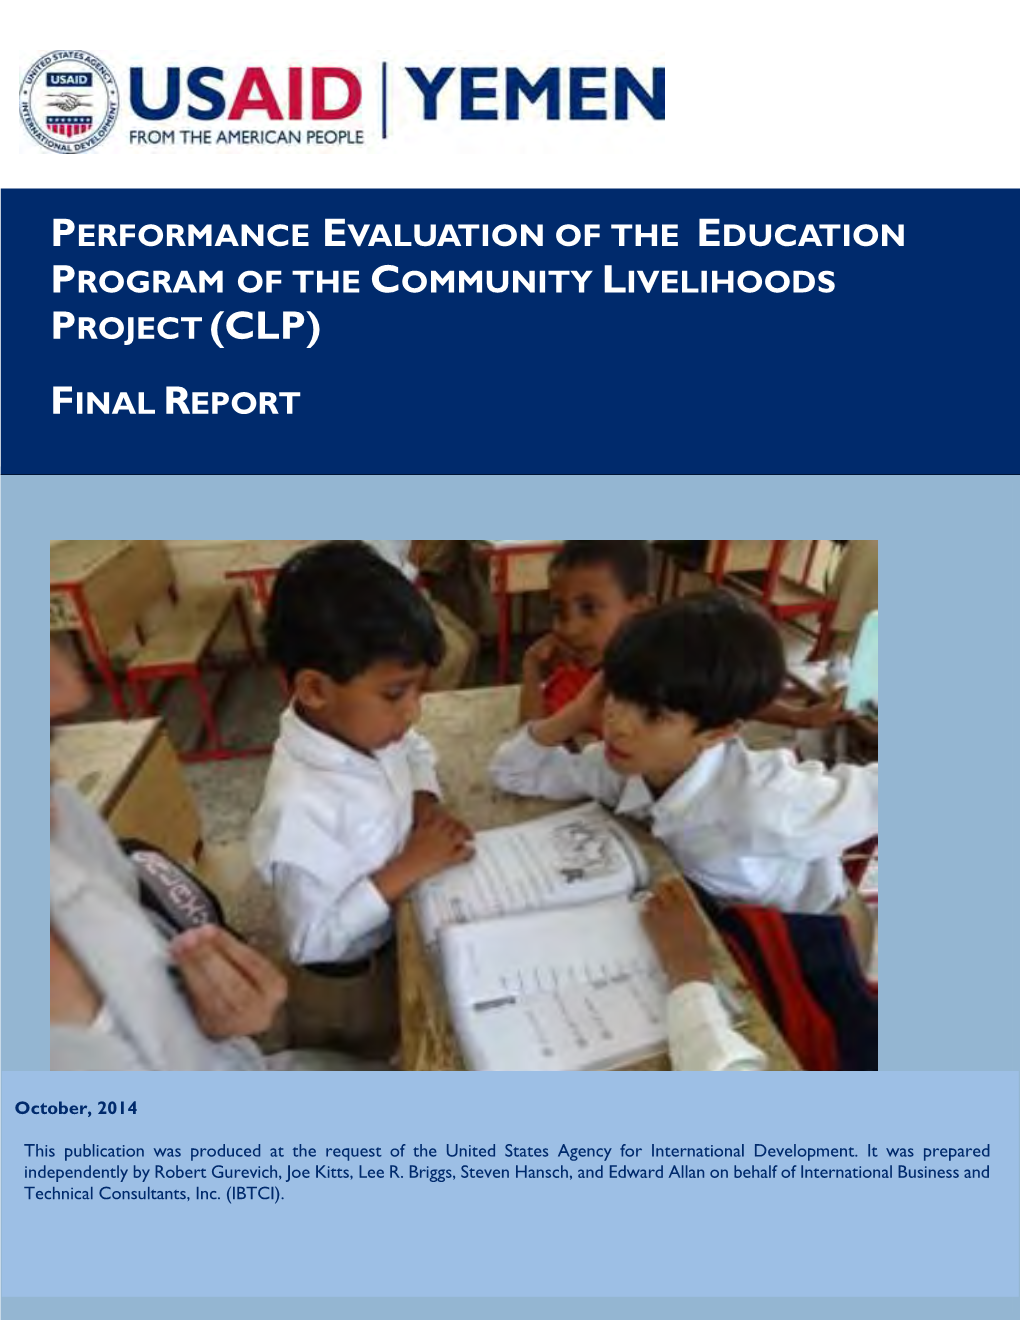 Performance Evaluation of the Education Program of the Community Livelihoods Project (Clp)